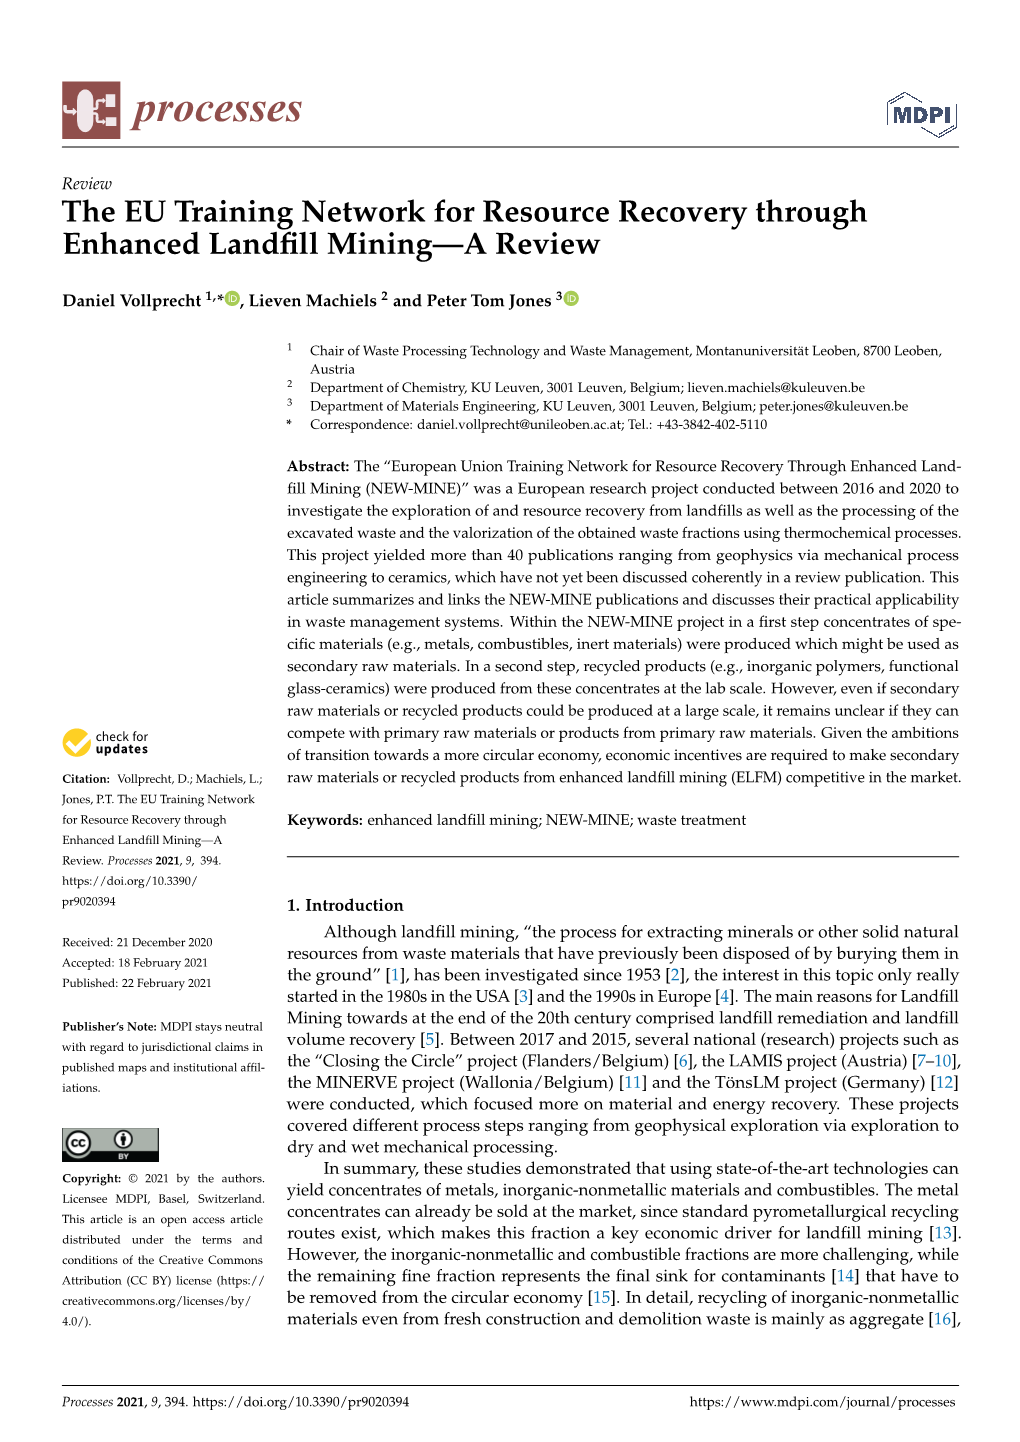 The EU Training Network for Resource Recovery Through Enhanced Landfill Mining—A Review